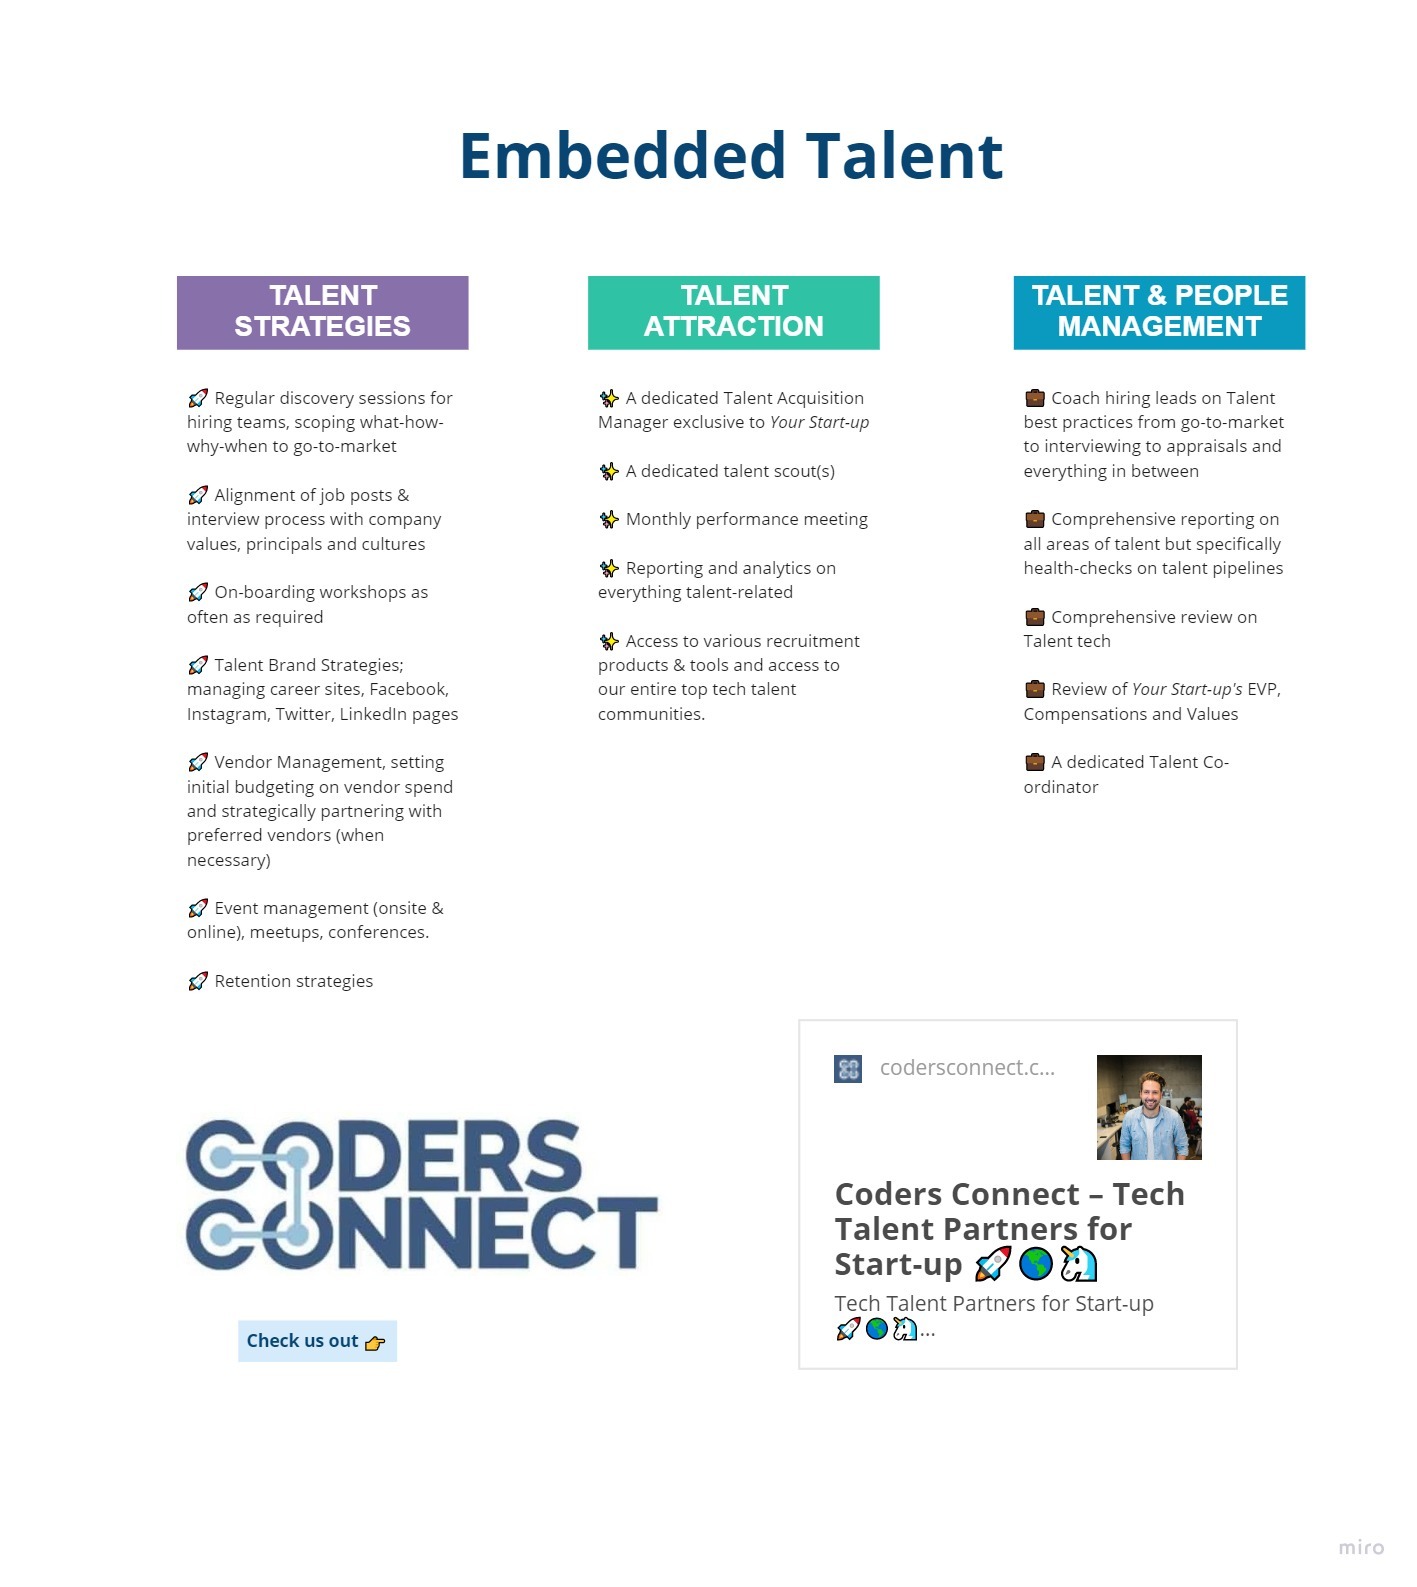 Coders Connect - Embedded Talent (11) (2)